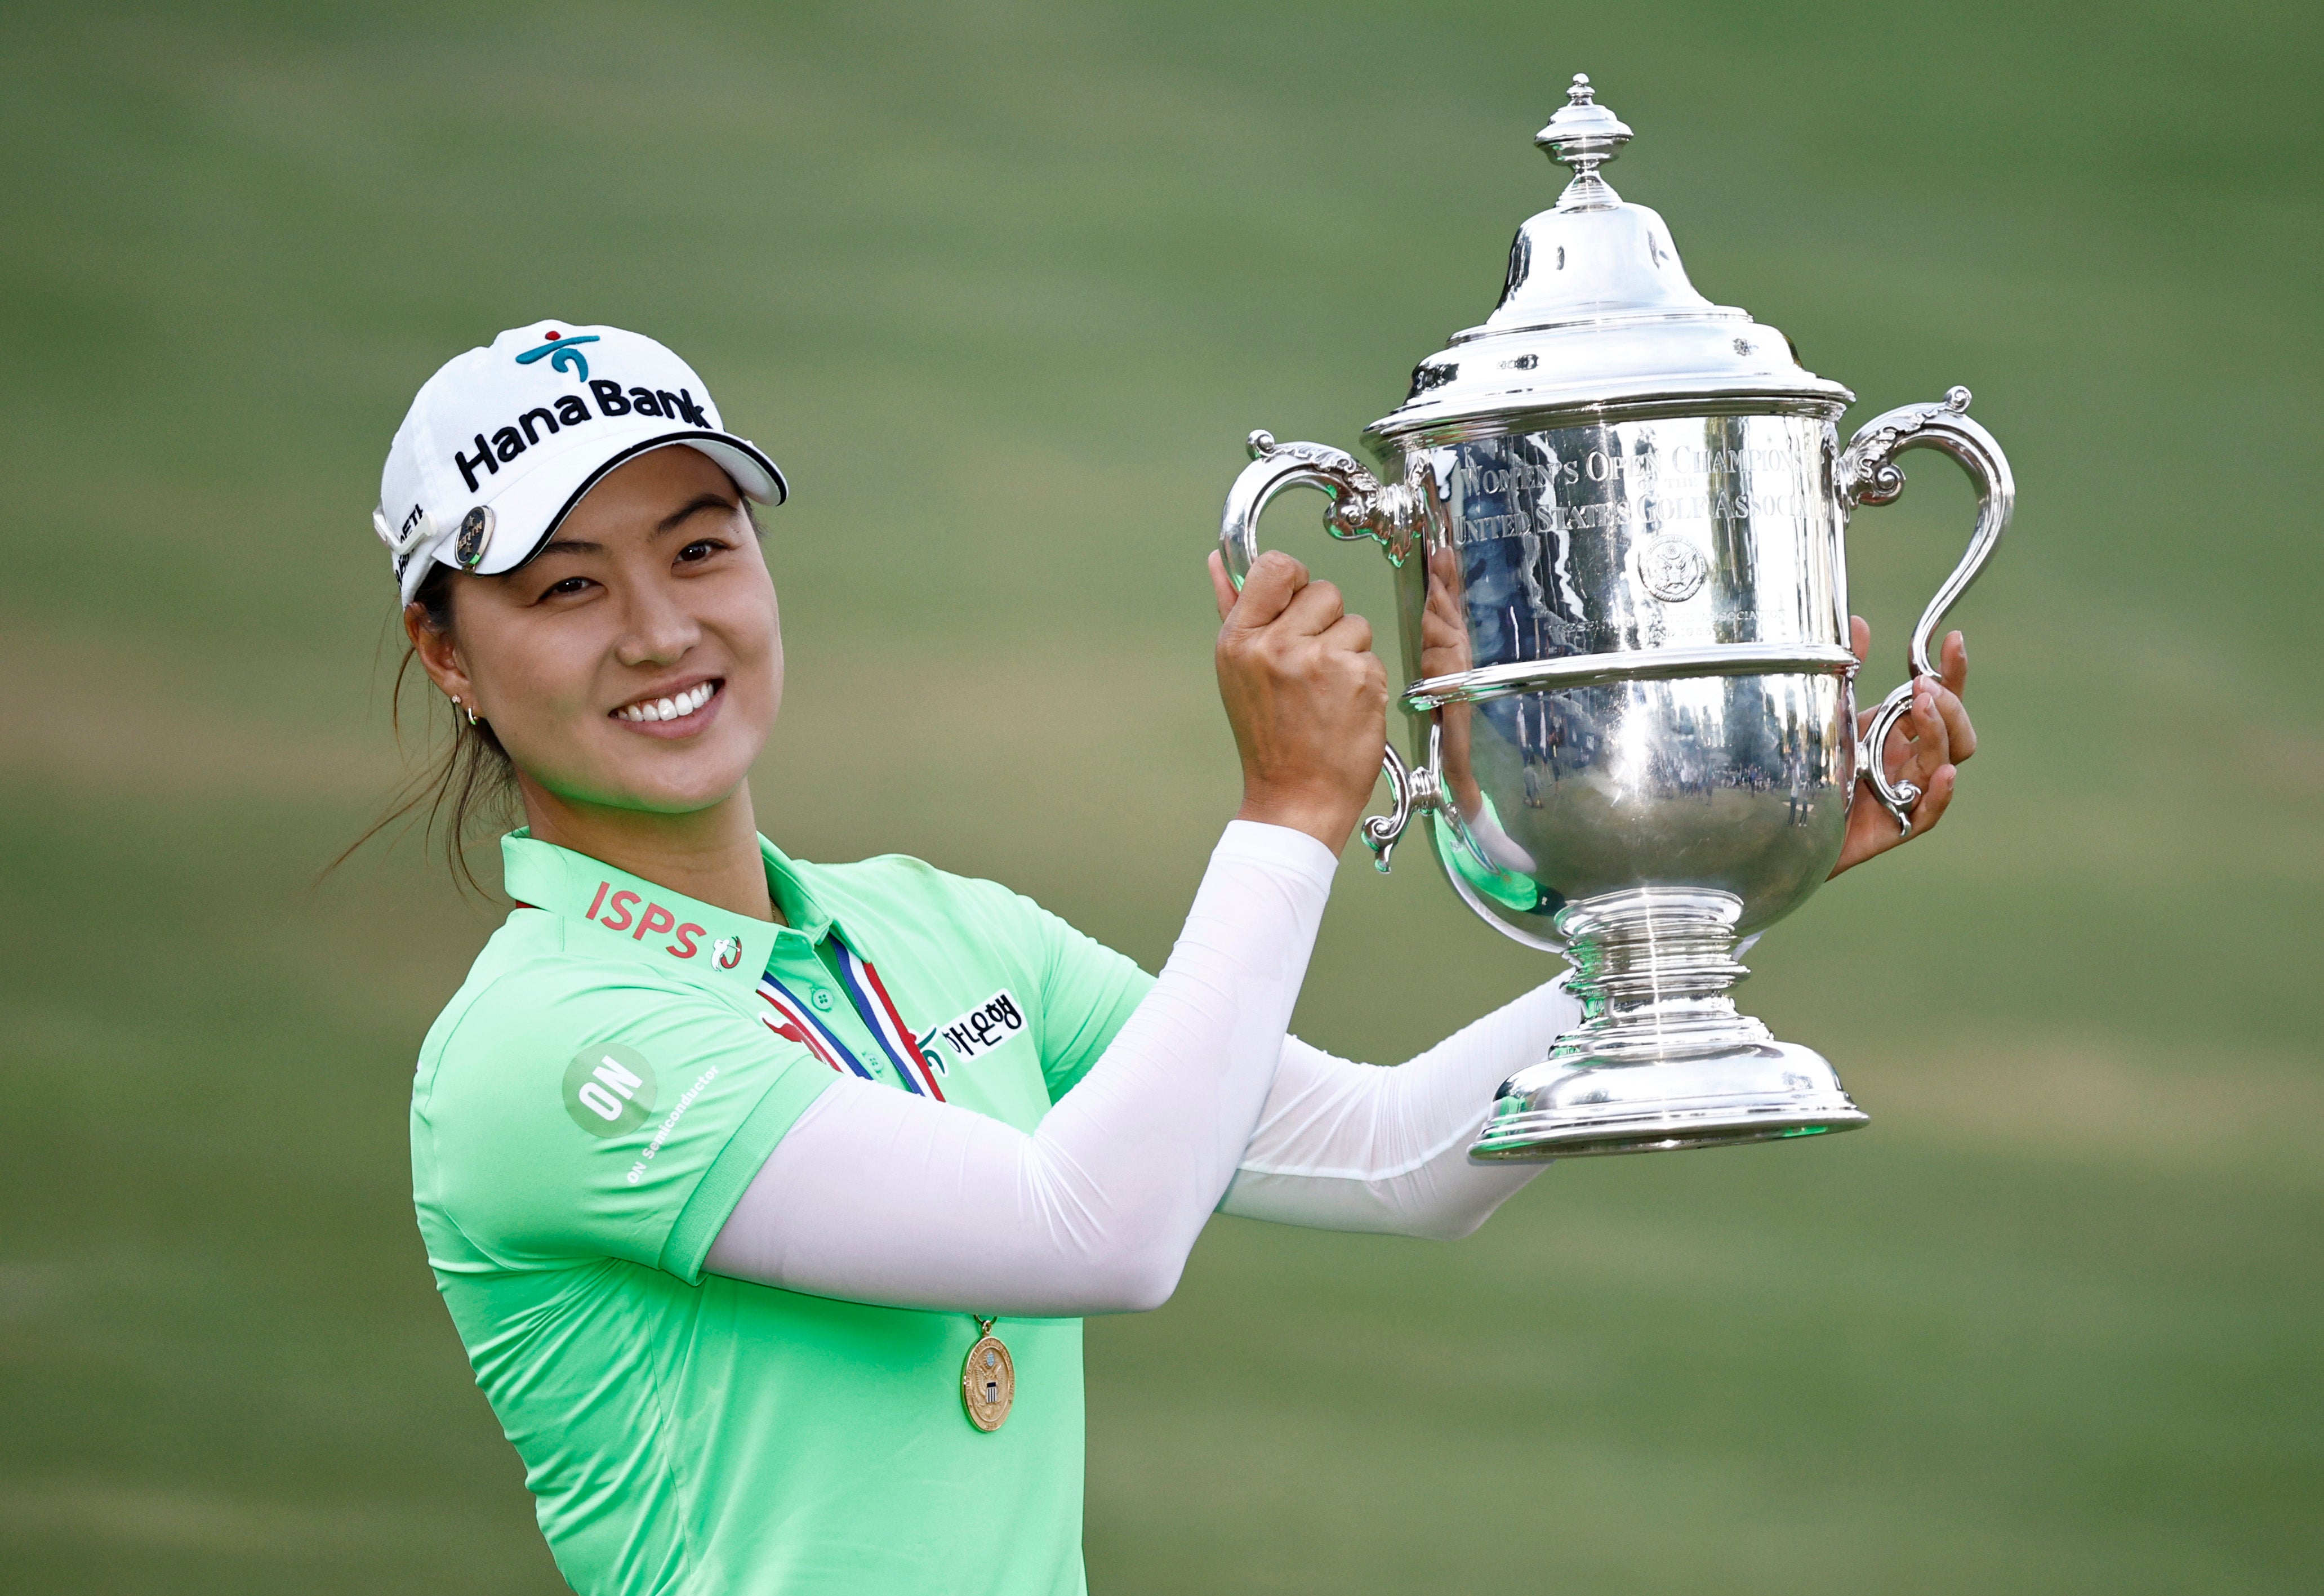 Minjee Lee of Australia poses with the trophy after winning the 77th US Women's Open at Pine Needles, North Carolina, on Sunday